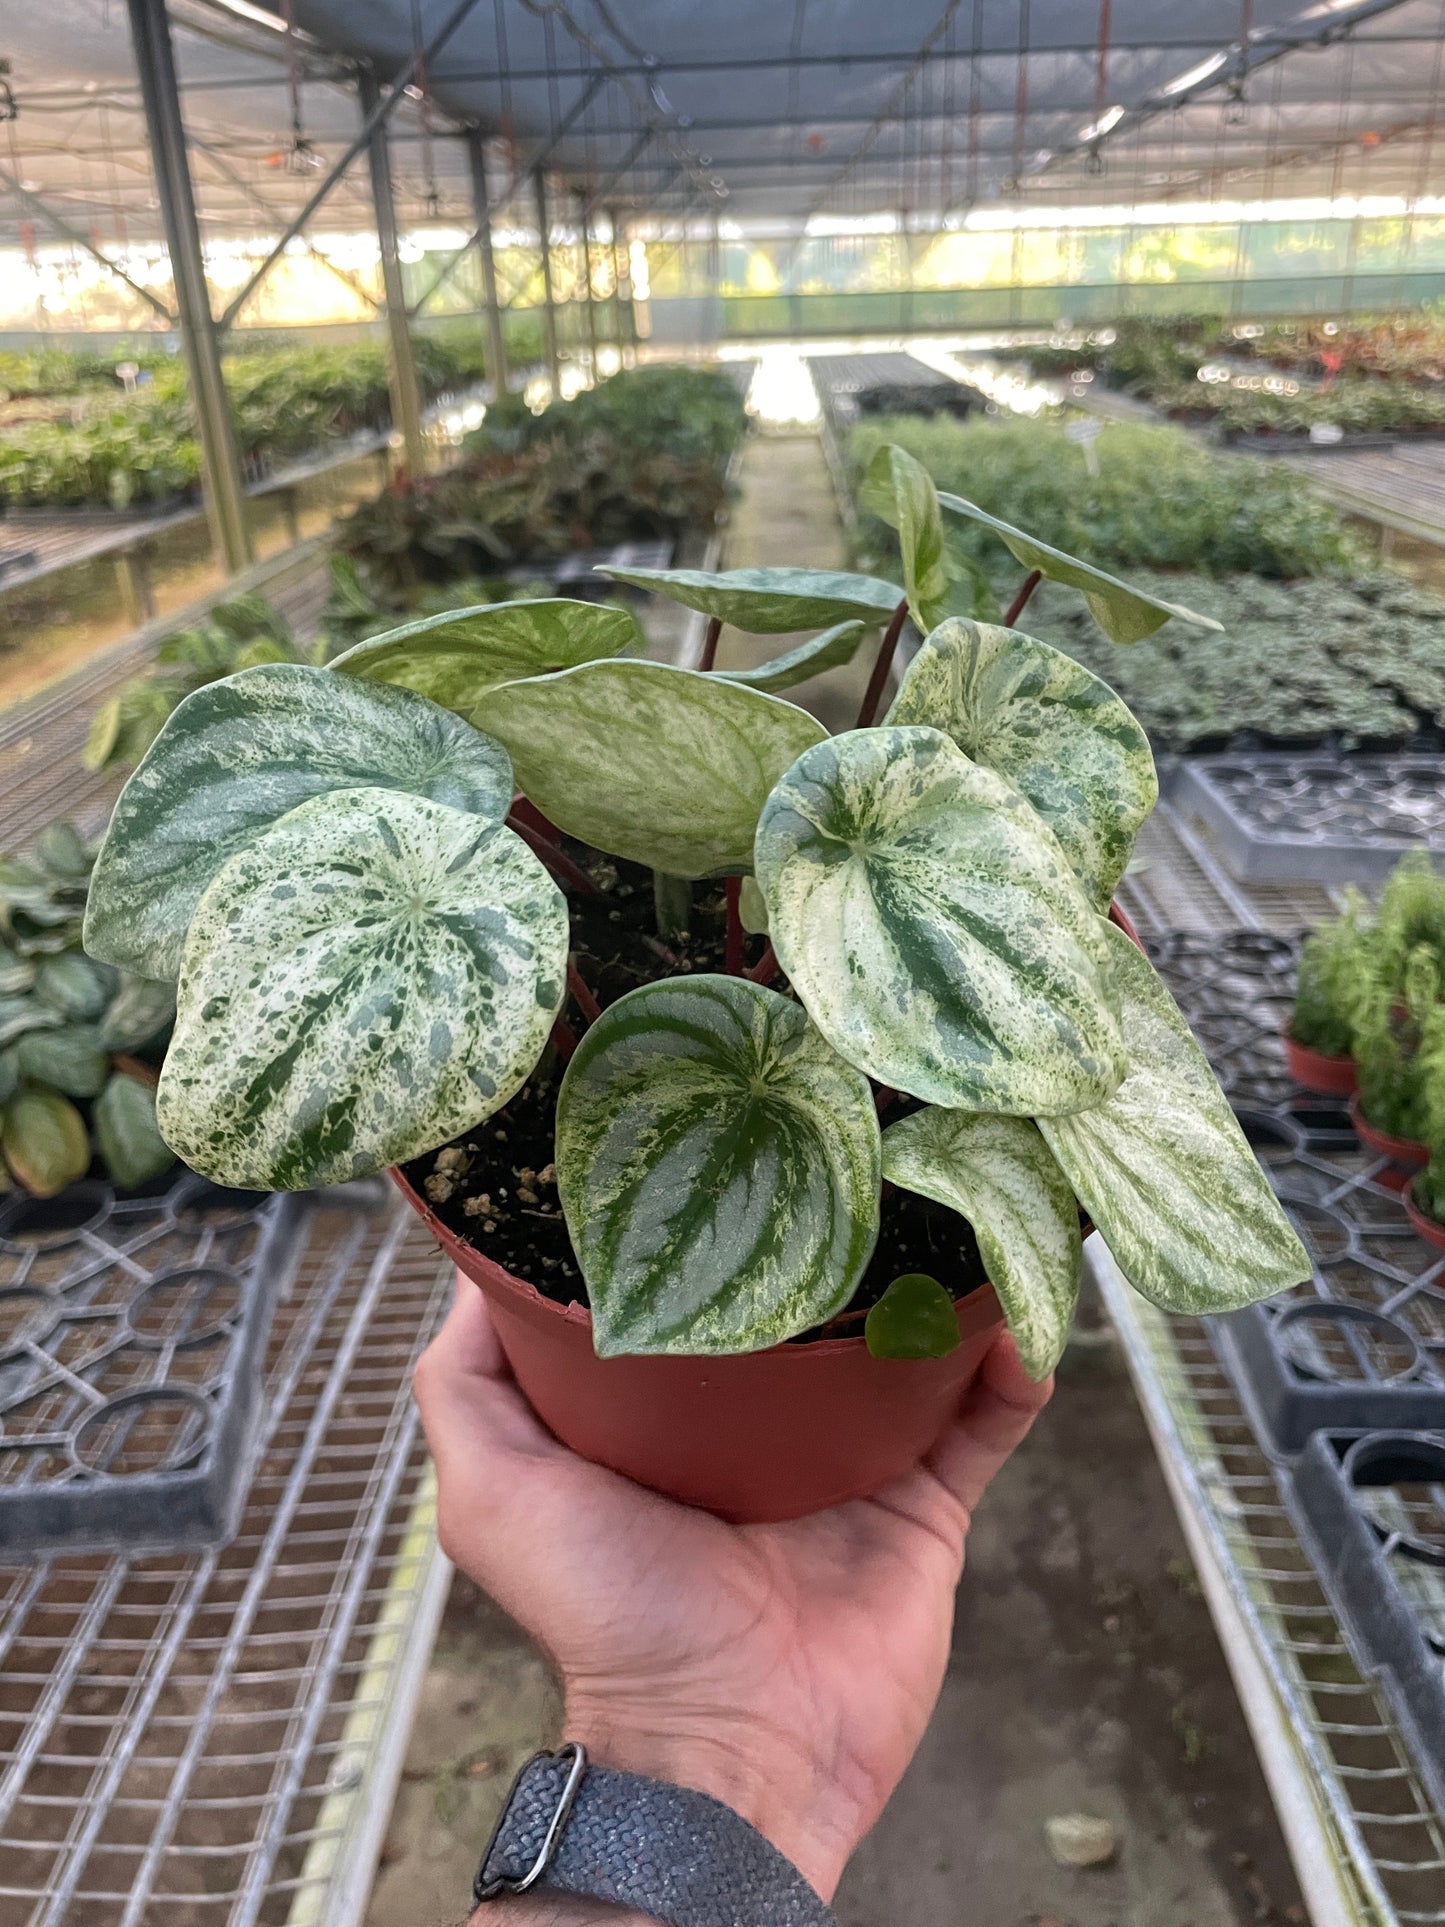 Peperomia 'Watermelon Variegated'- Stunning Watermelon Patterned Leaves With White Cream Speckled & Splashy Variegation- Tropical Houseplant- (6 Inch Nursery Pot)